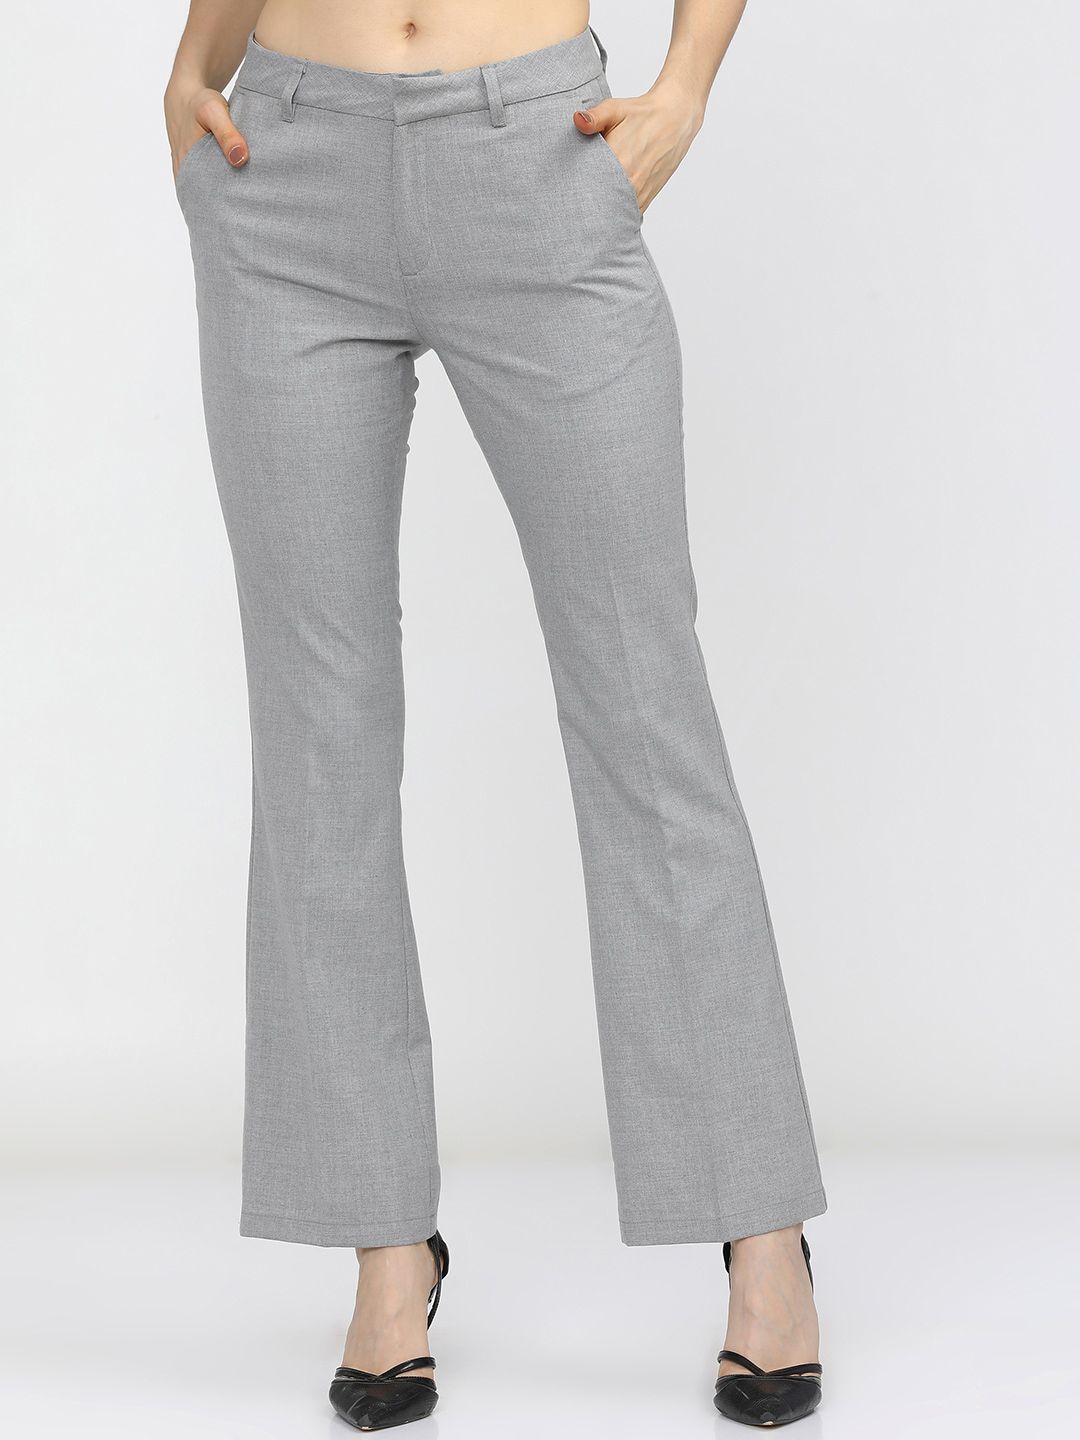 Tokyo Talkies Women Grey Textured Straight Fit Trousers Price in India